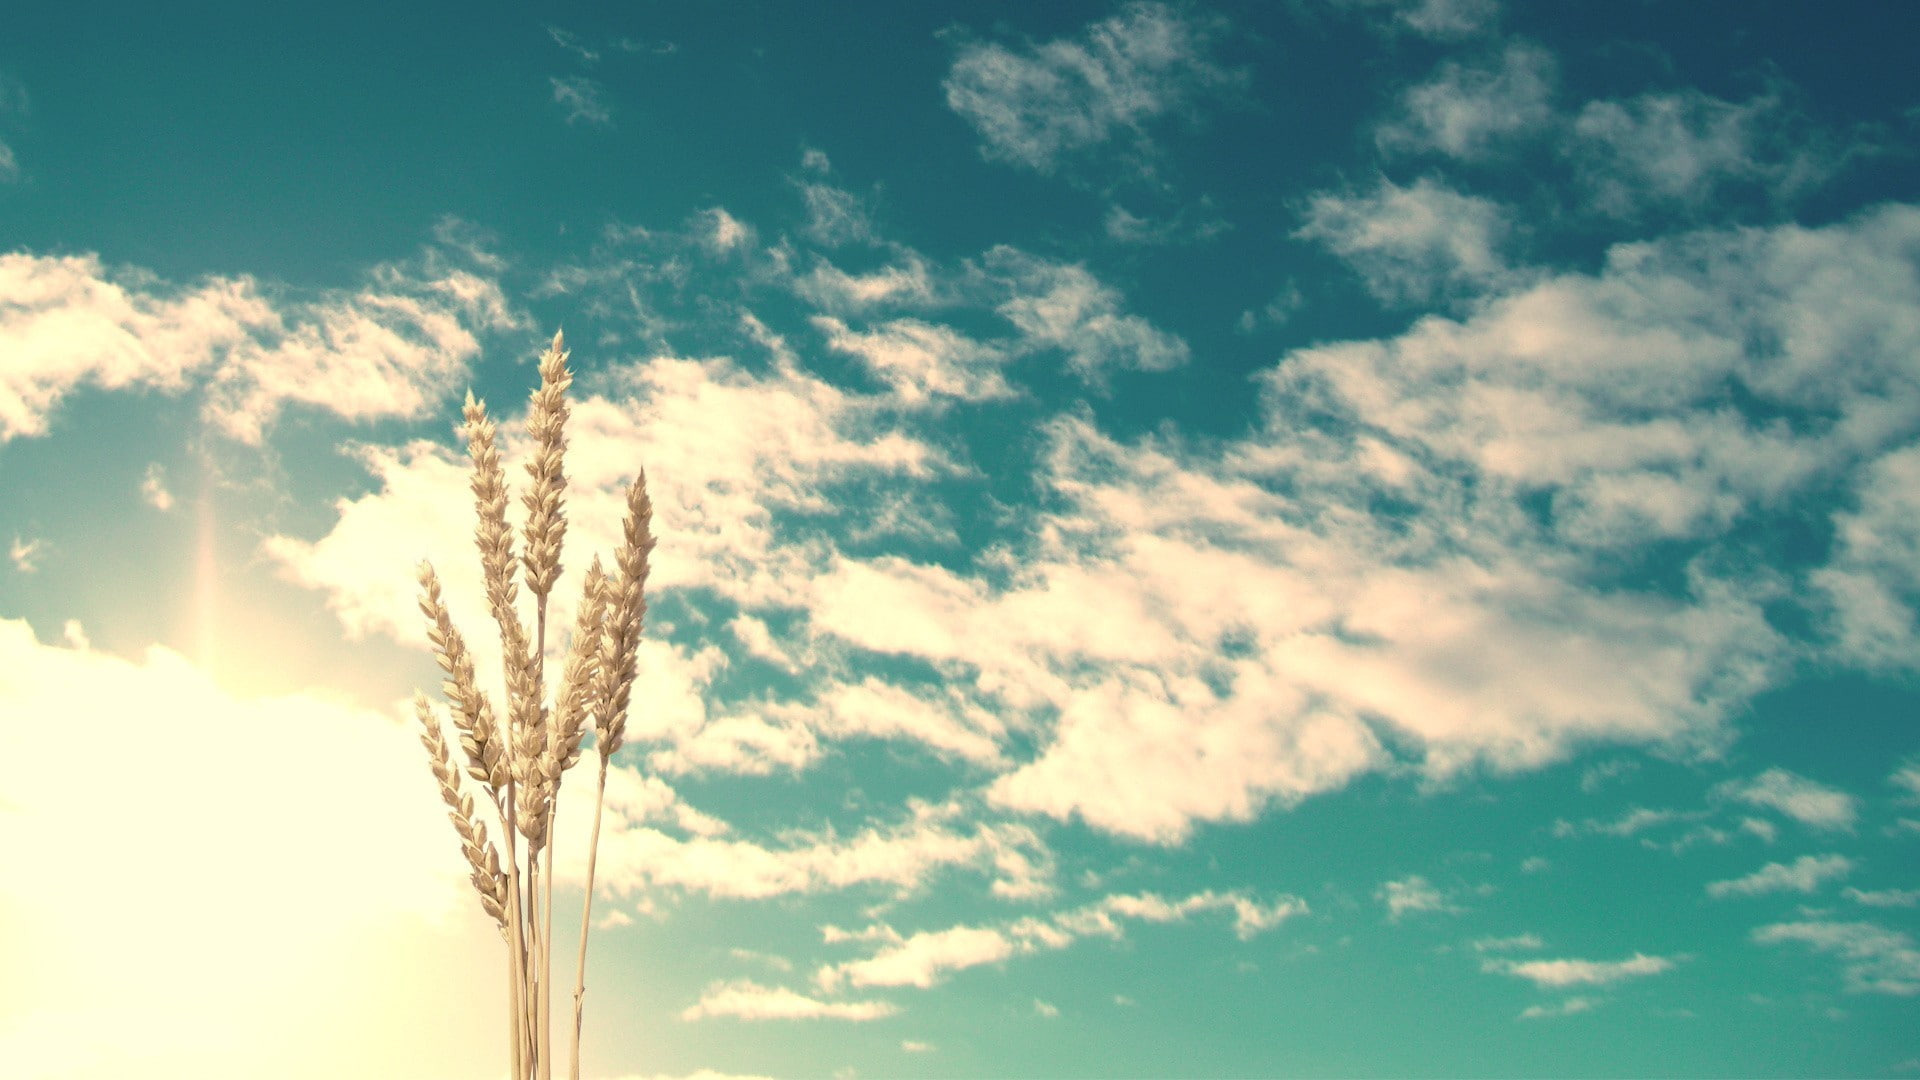 sky, spikelets, clouds, Sun, cloud - sky, nature, low angle view